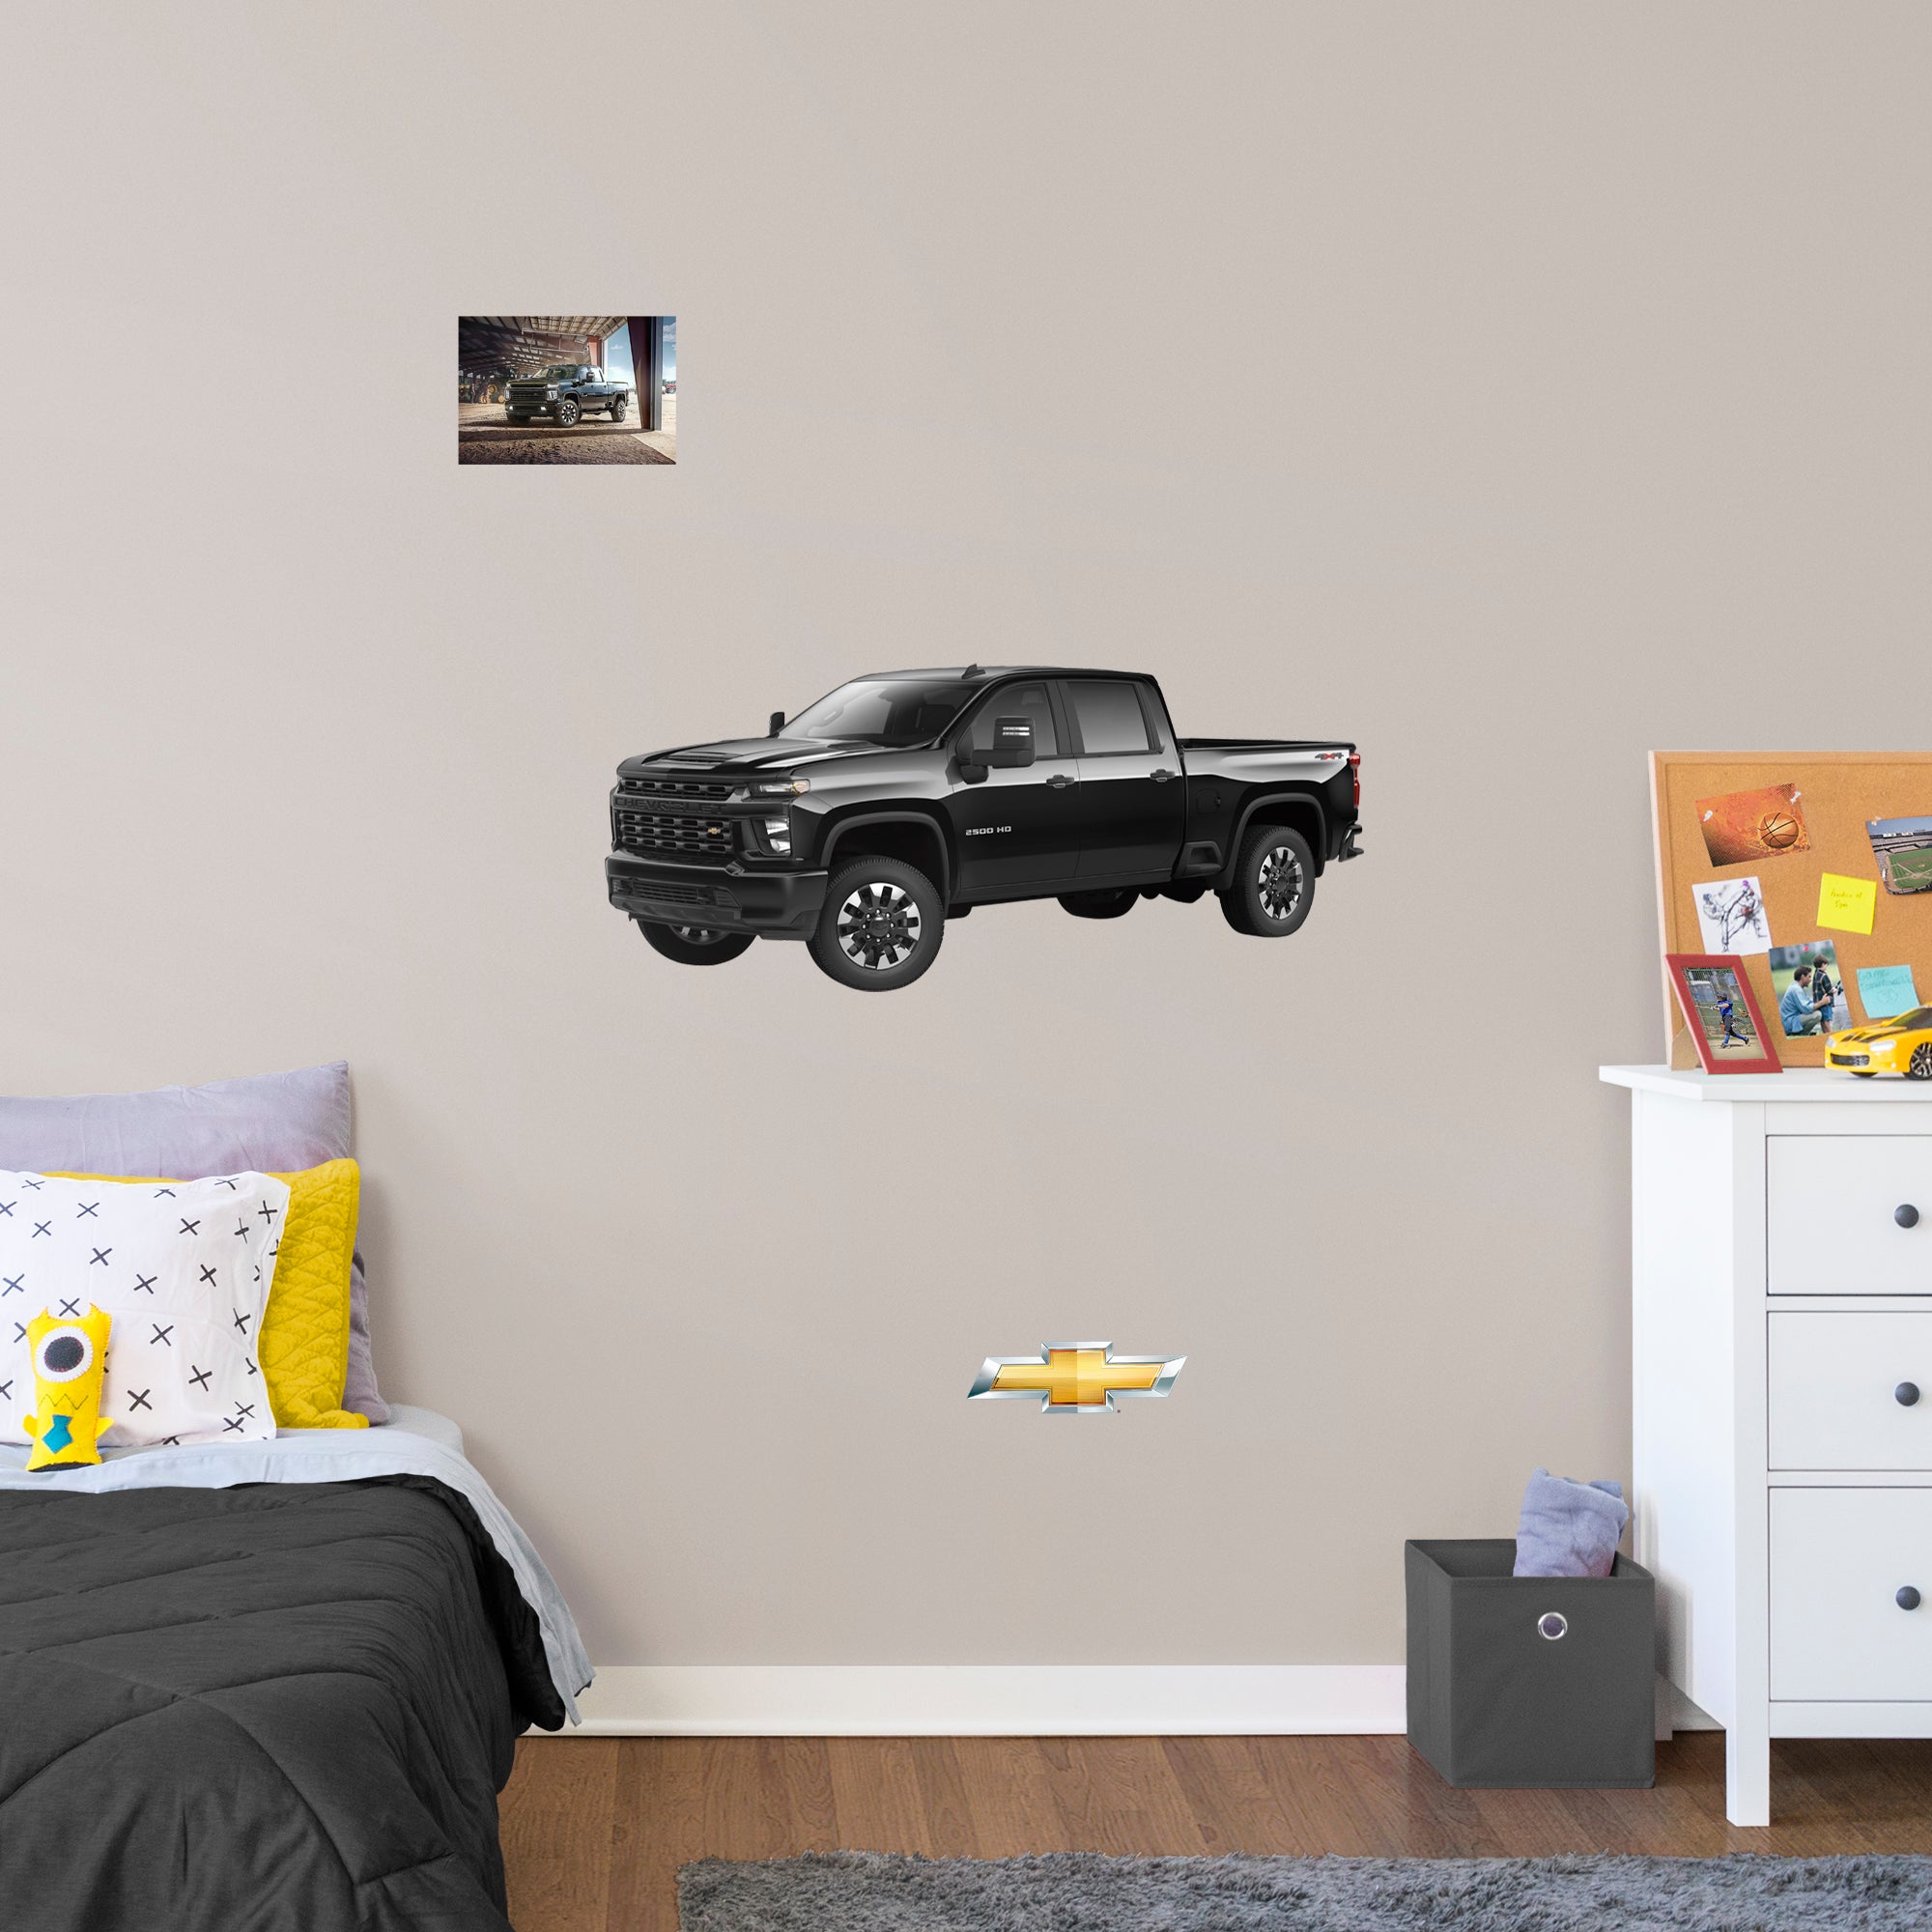 Chevrolet Black Silverado: Officially Licensed GM Removable Wall Decal Giant + 2 Decals by Fathead | Vinyl